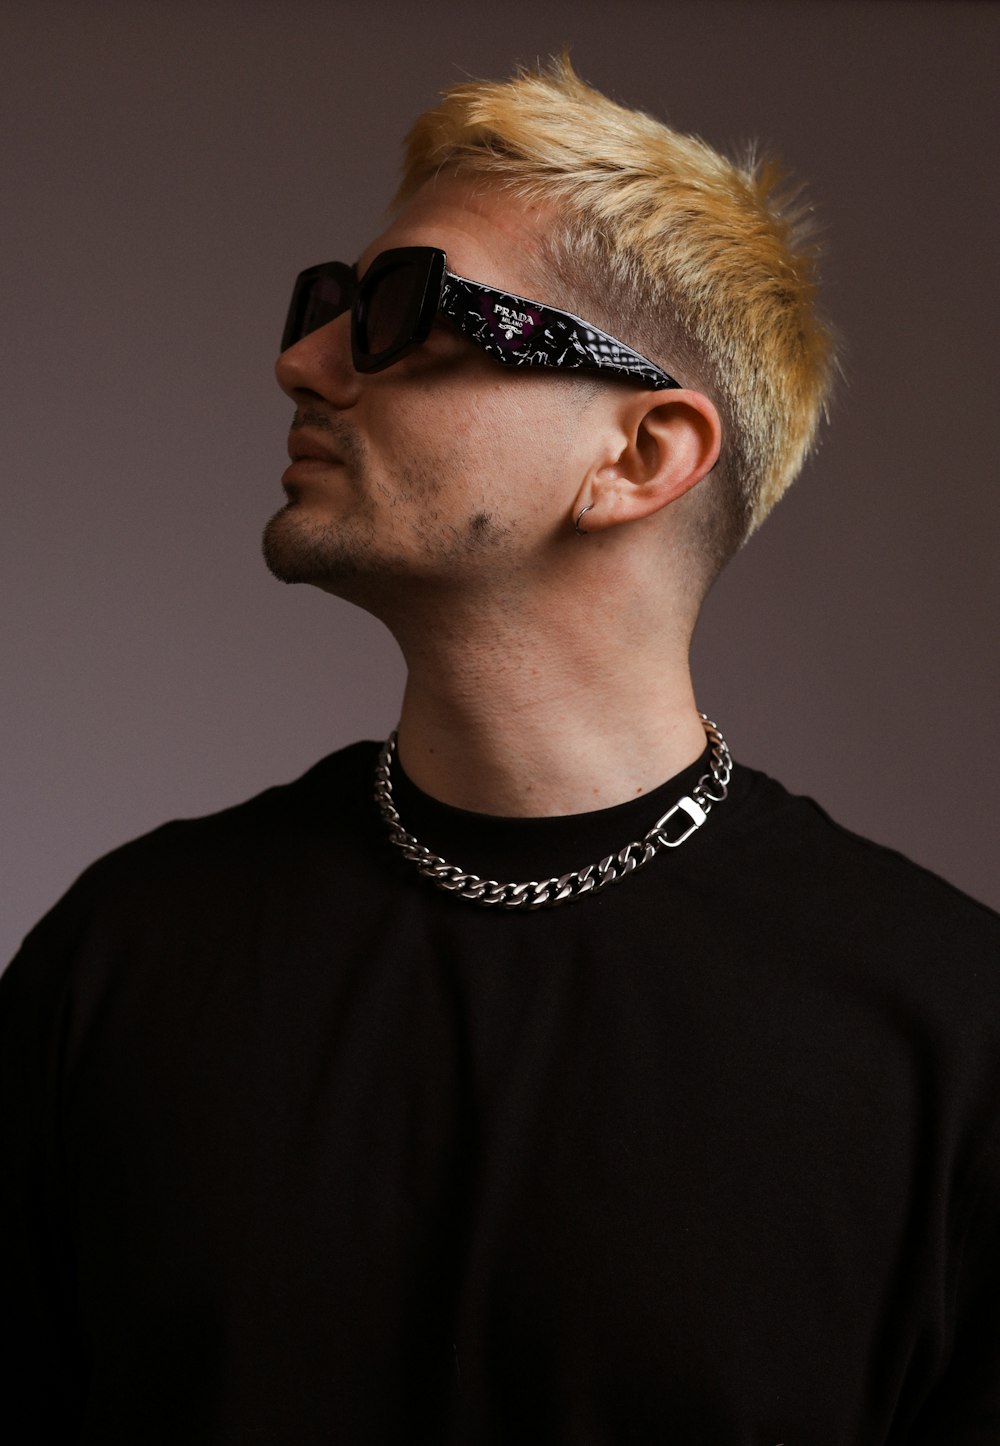 a man with blonde hair wearing sunglasses and a chain around his neck